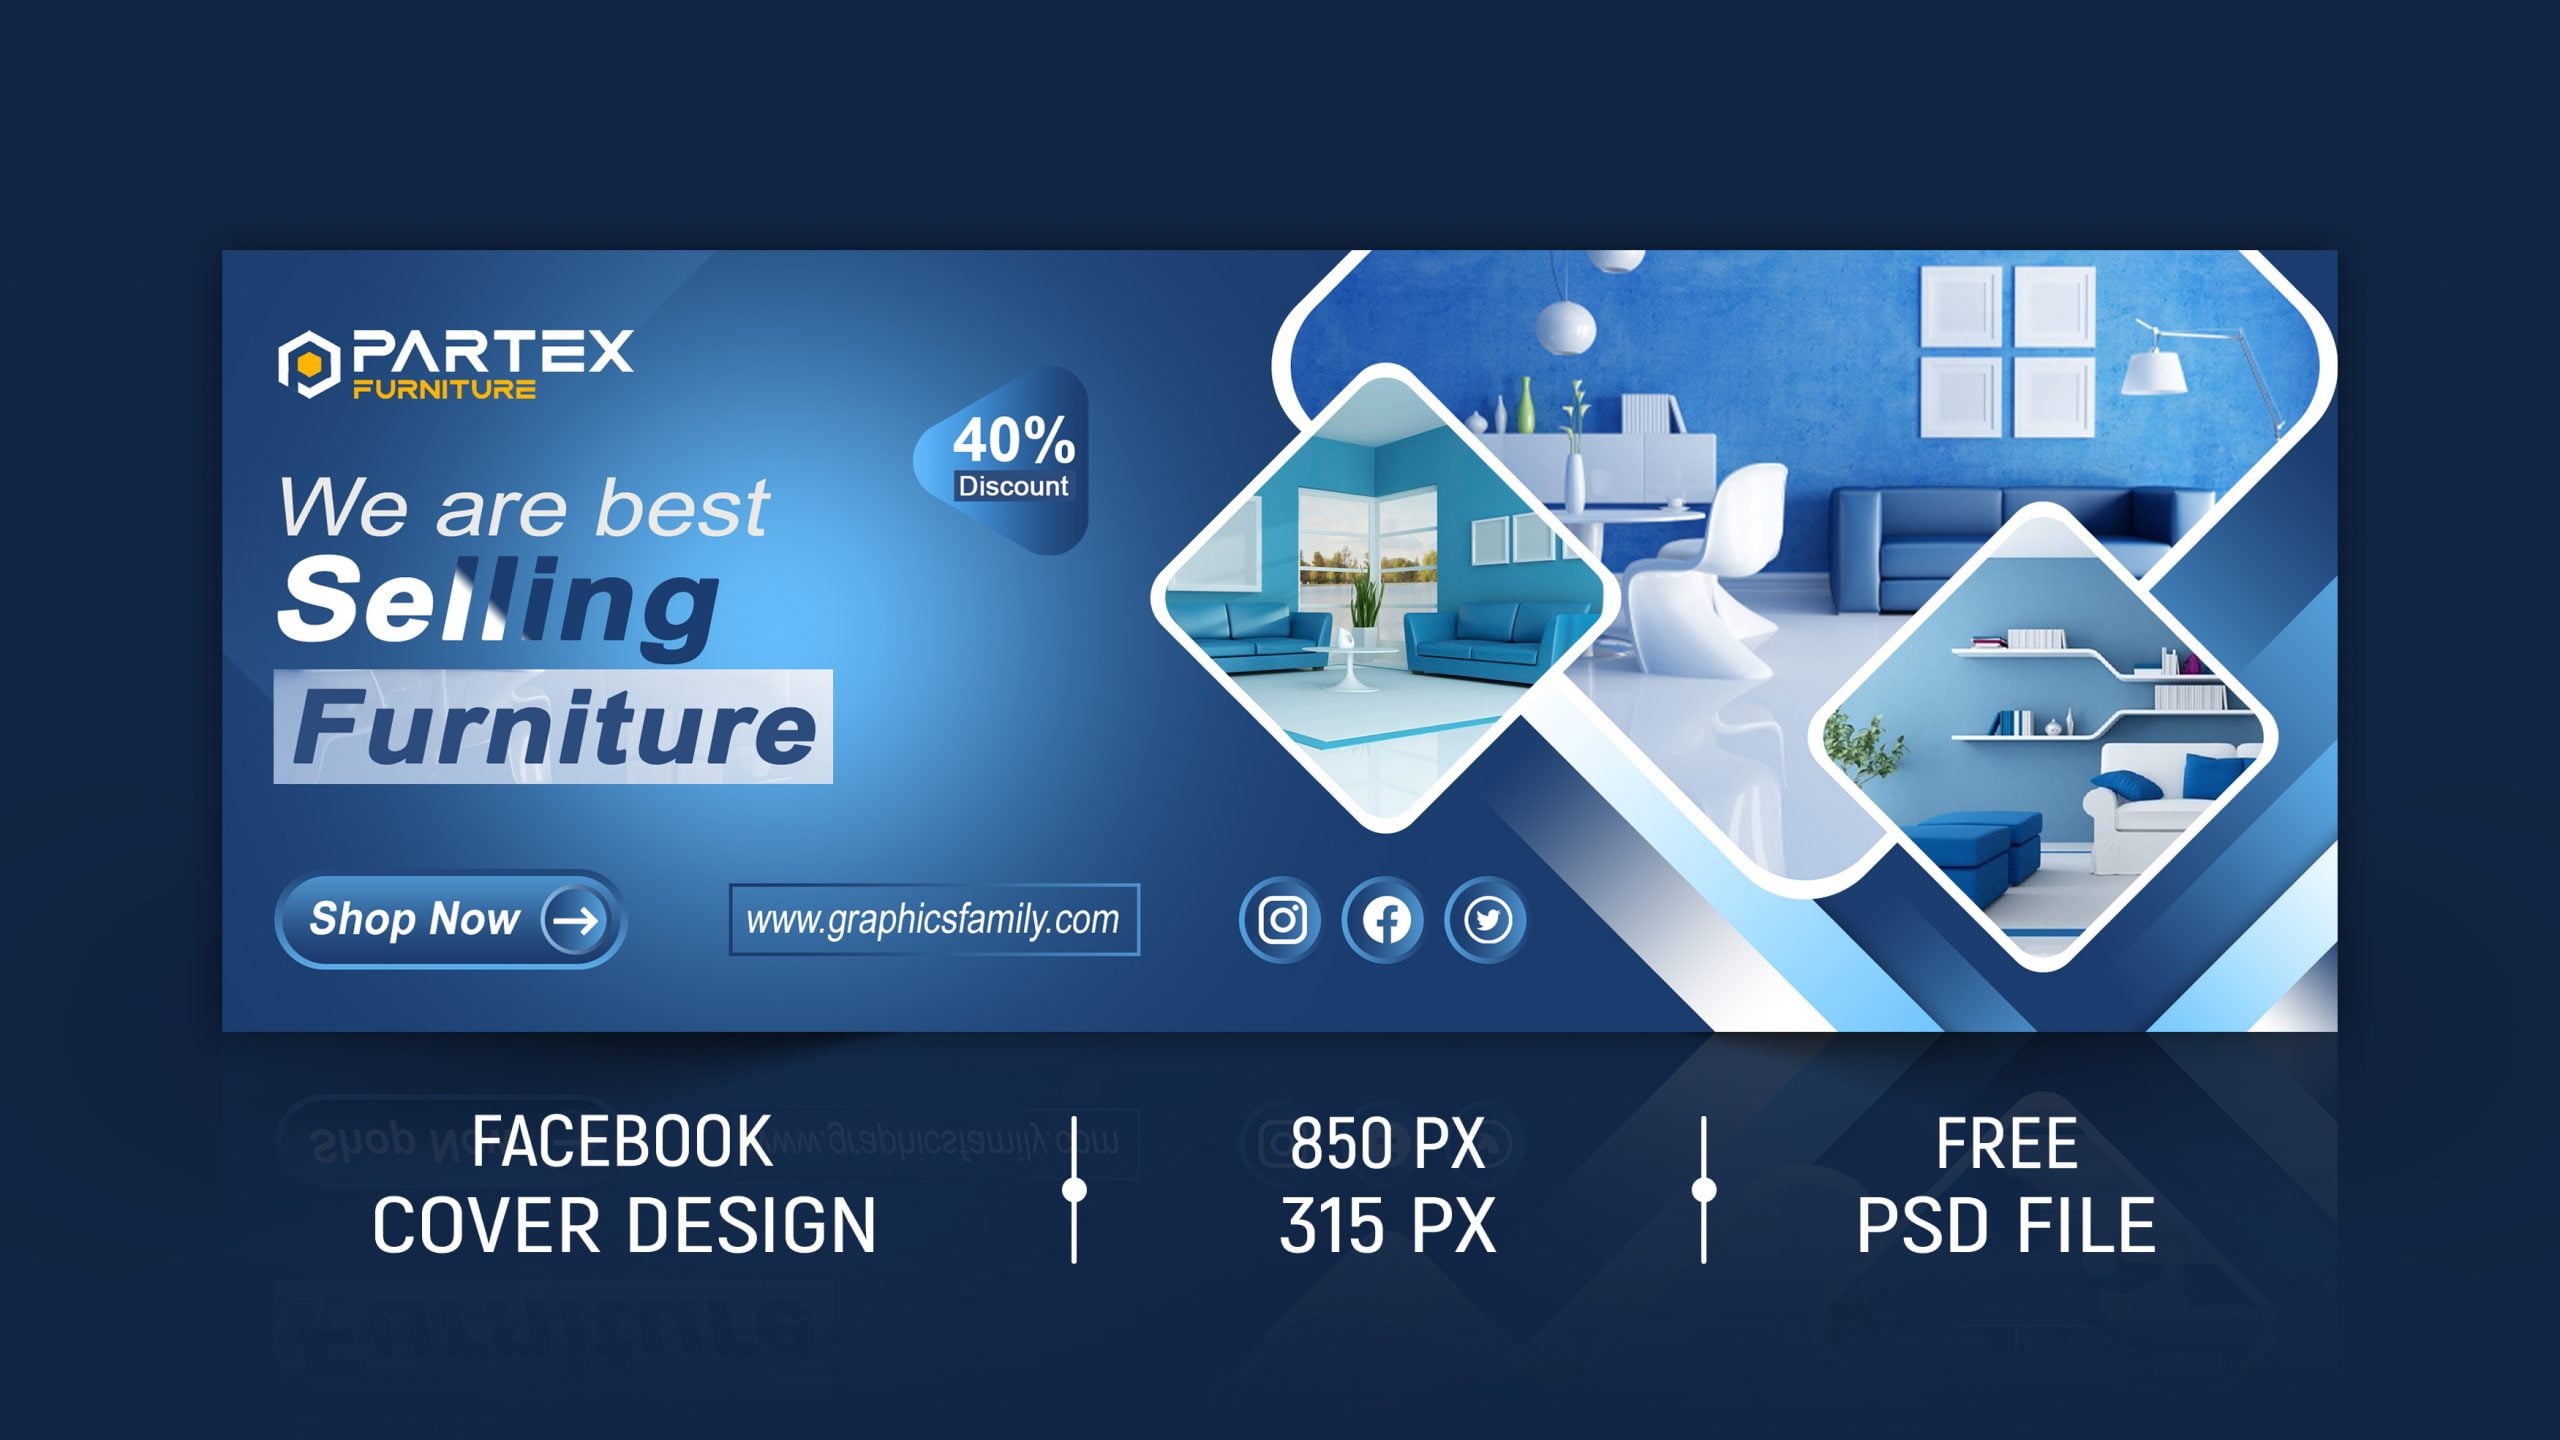 Furniture Store Editable Facebook Cover Design – GraphicsFamily